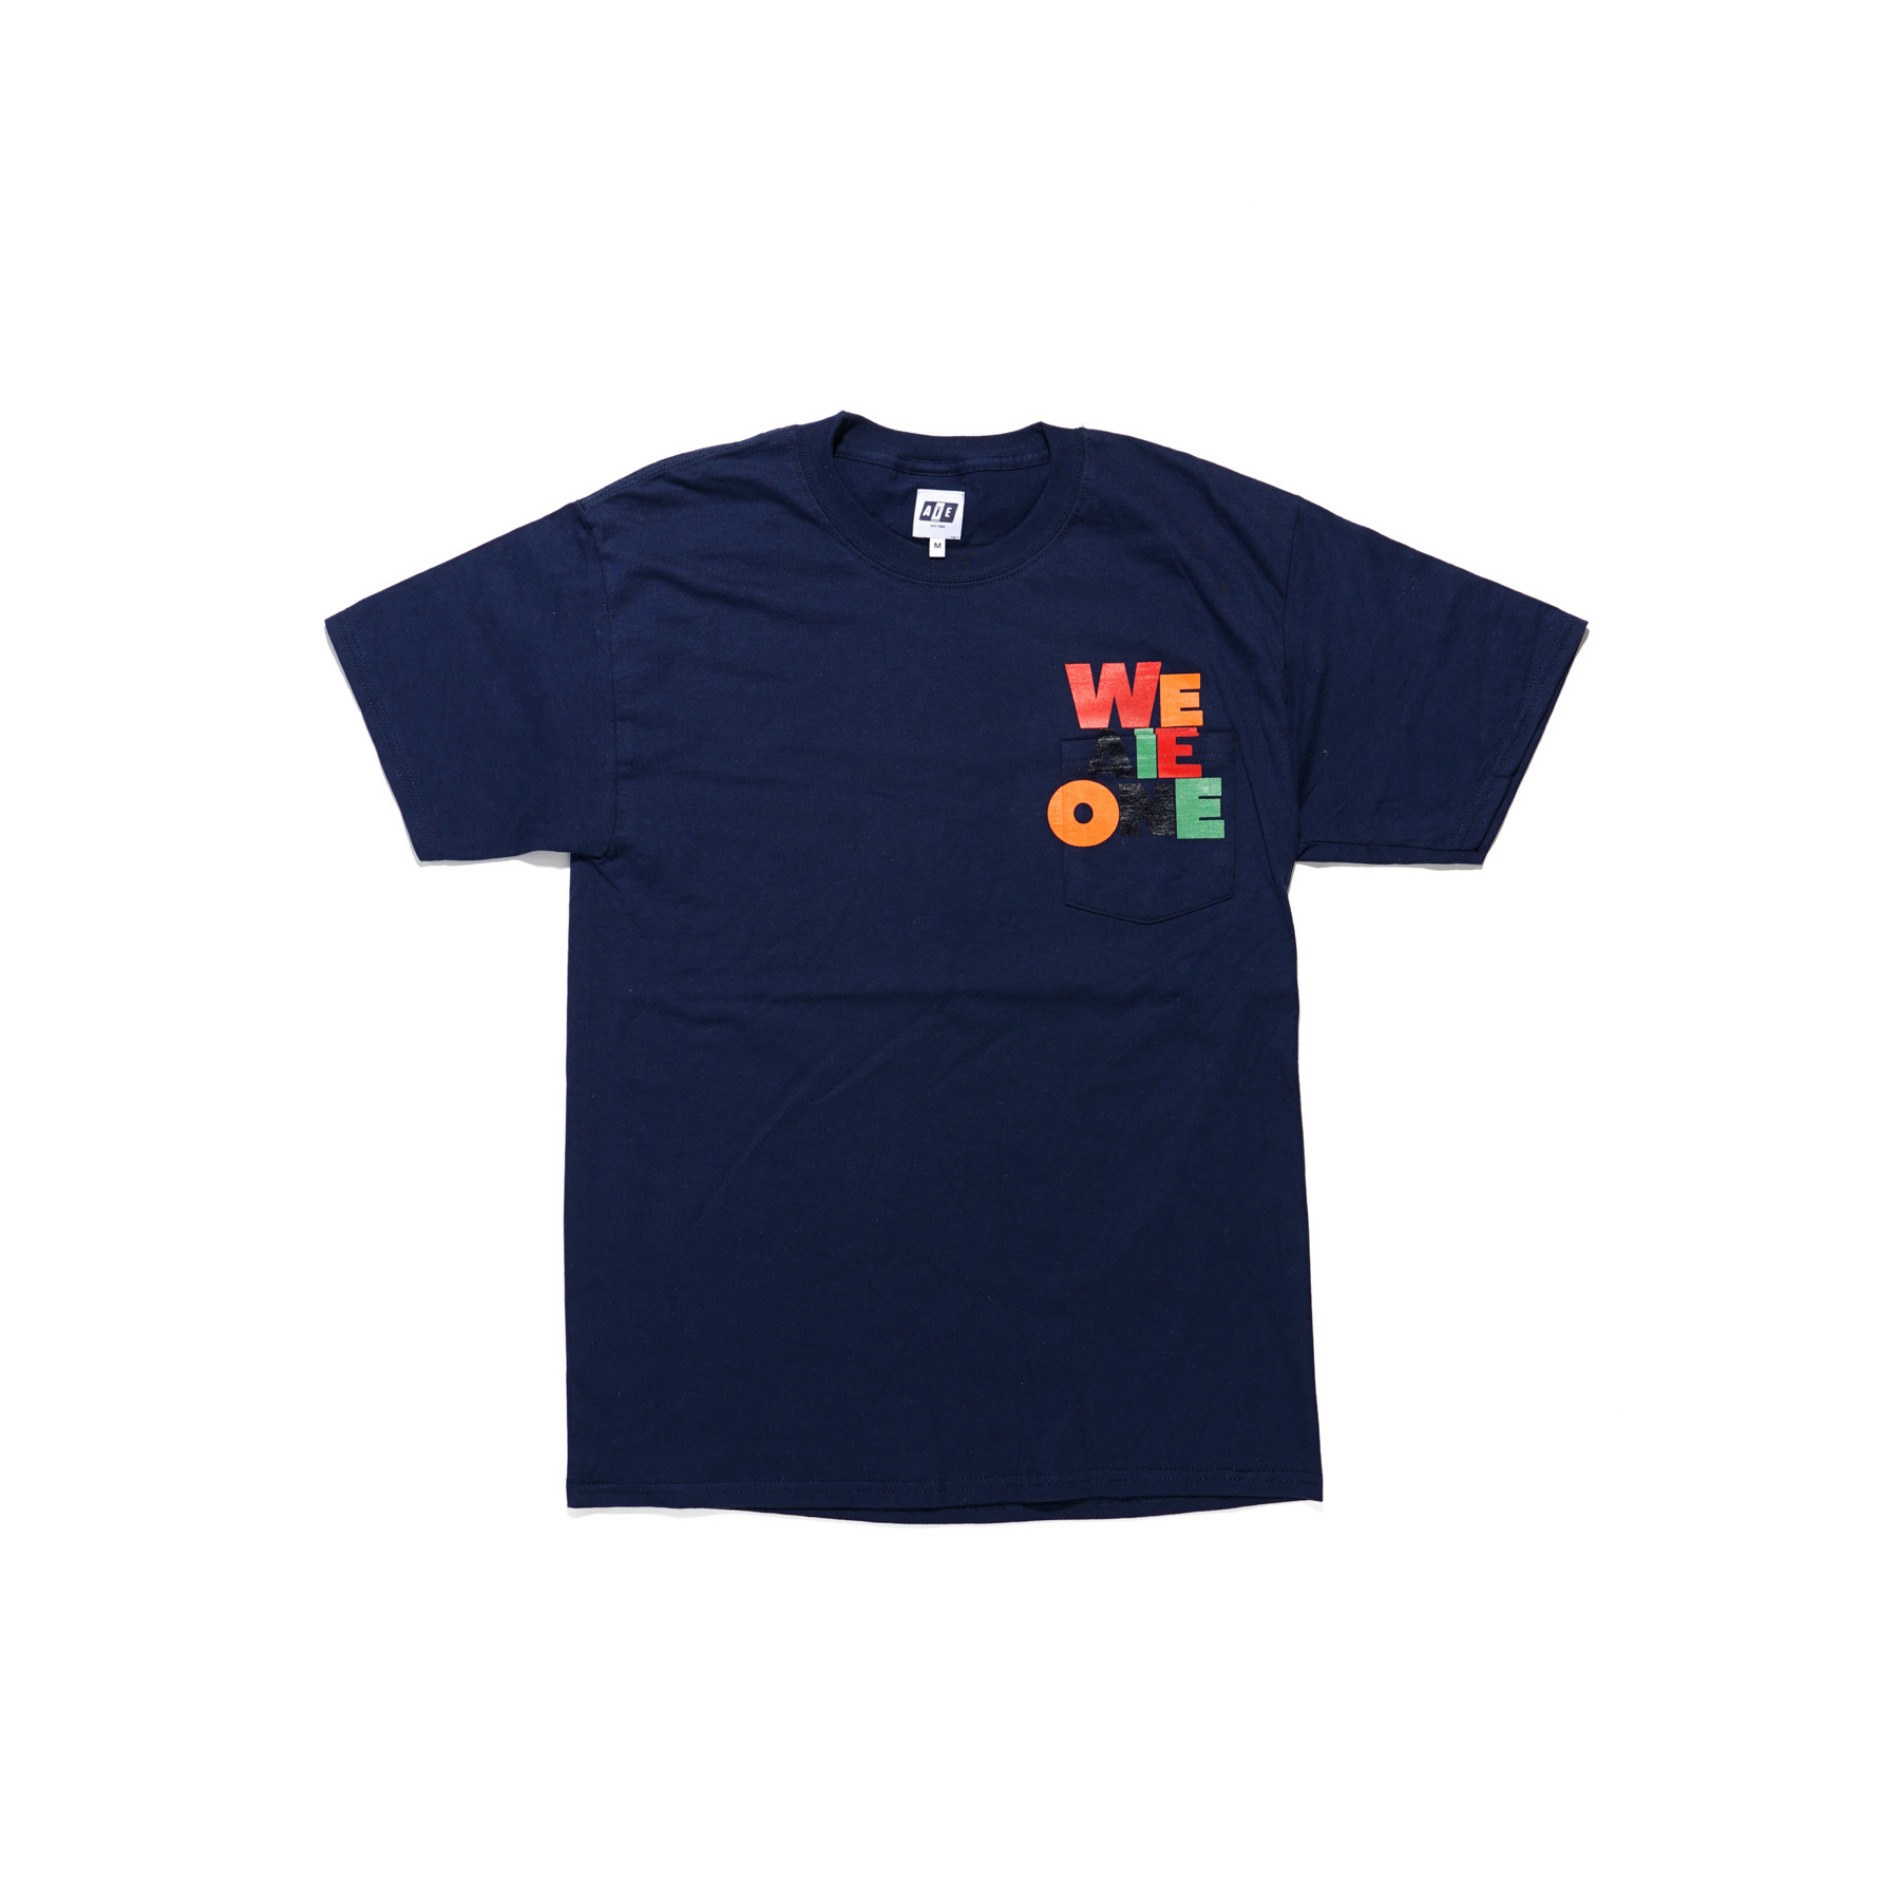 SS22 AIE / PRINTED WE AIE ONE S/S POCKET TEE NAVY